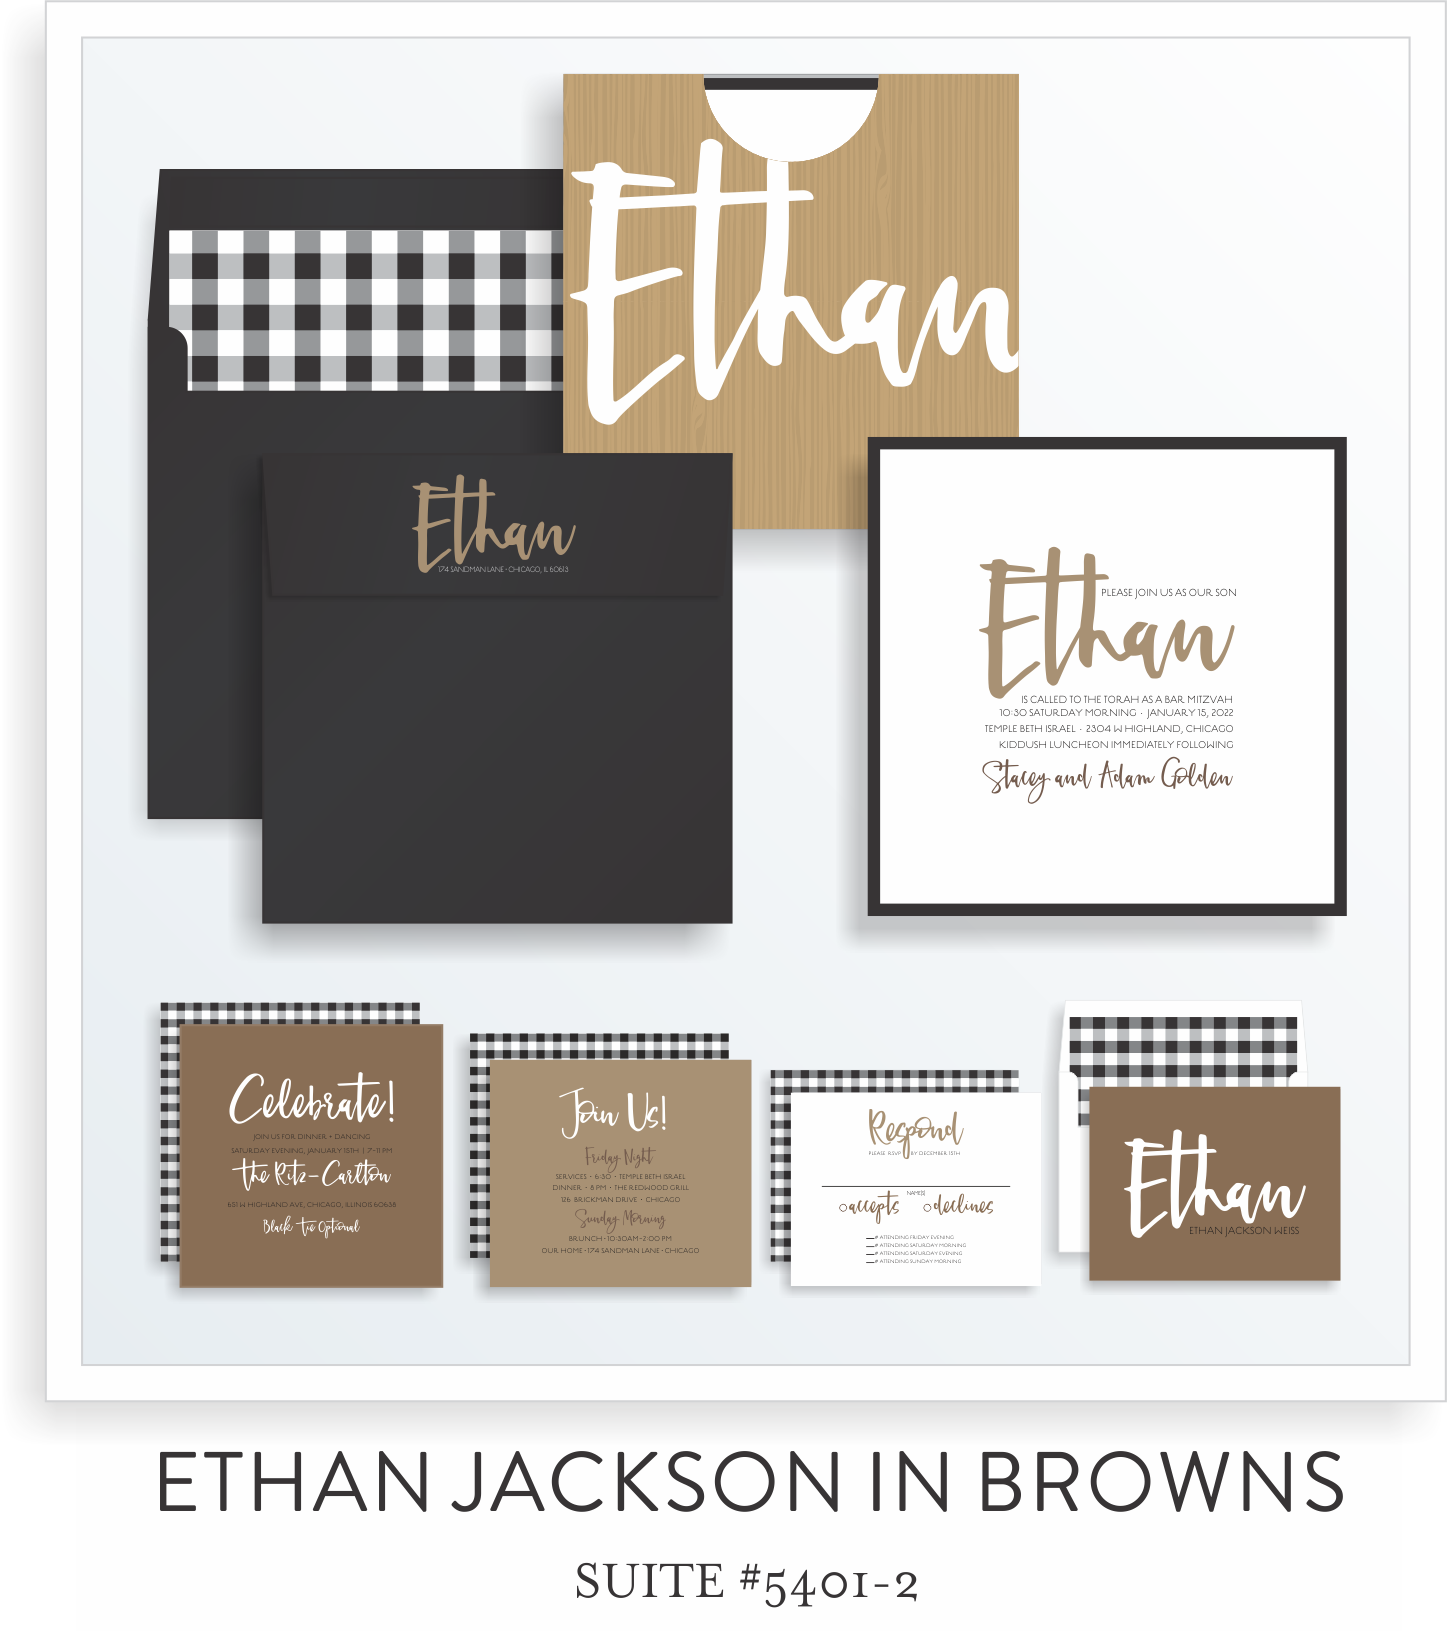 5401-2 ETHAN JACKSON IN BROWNS SUITE THUMB.png